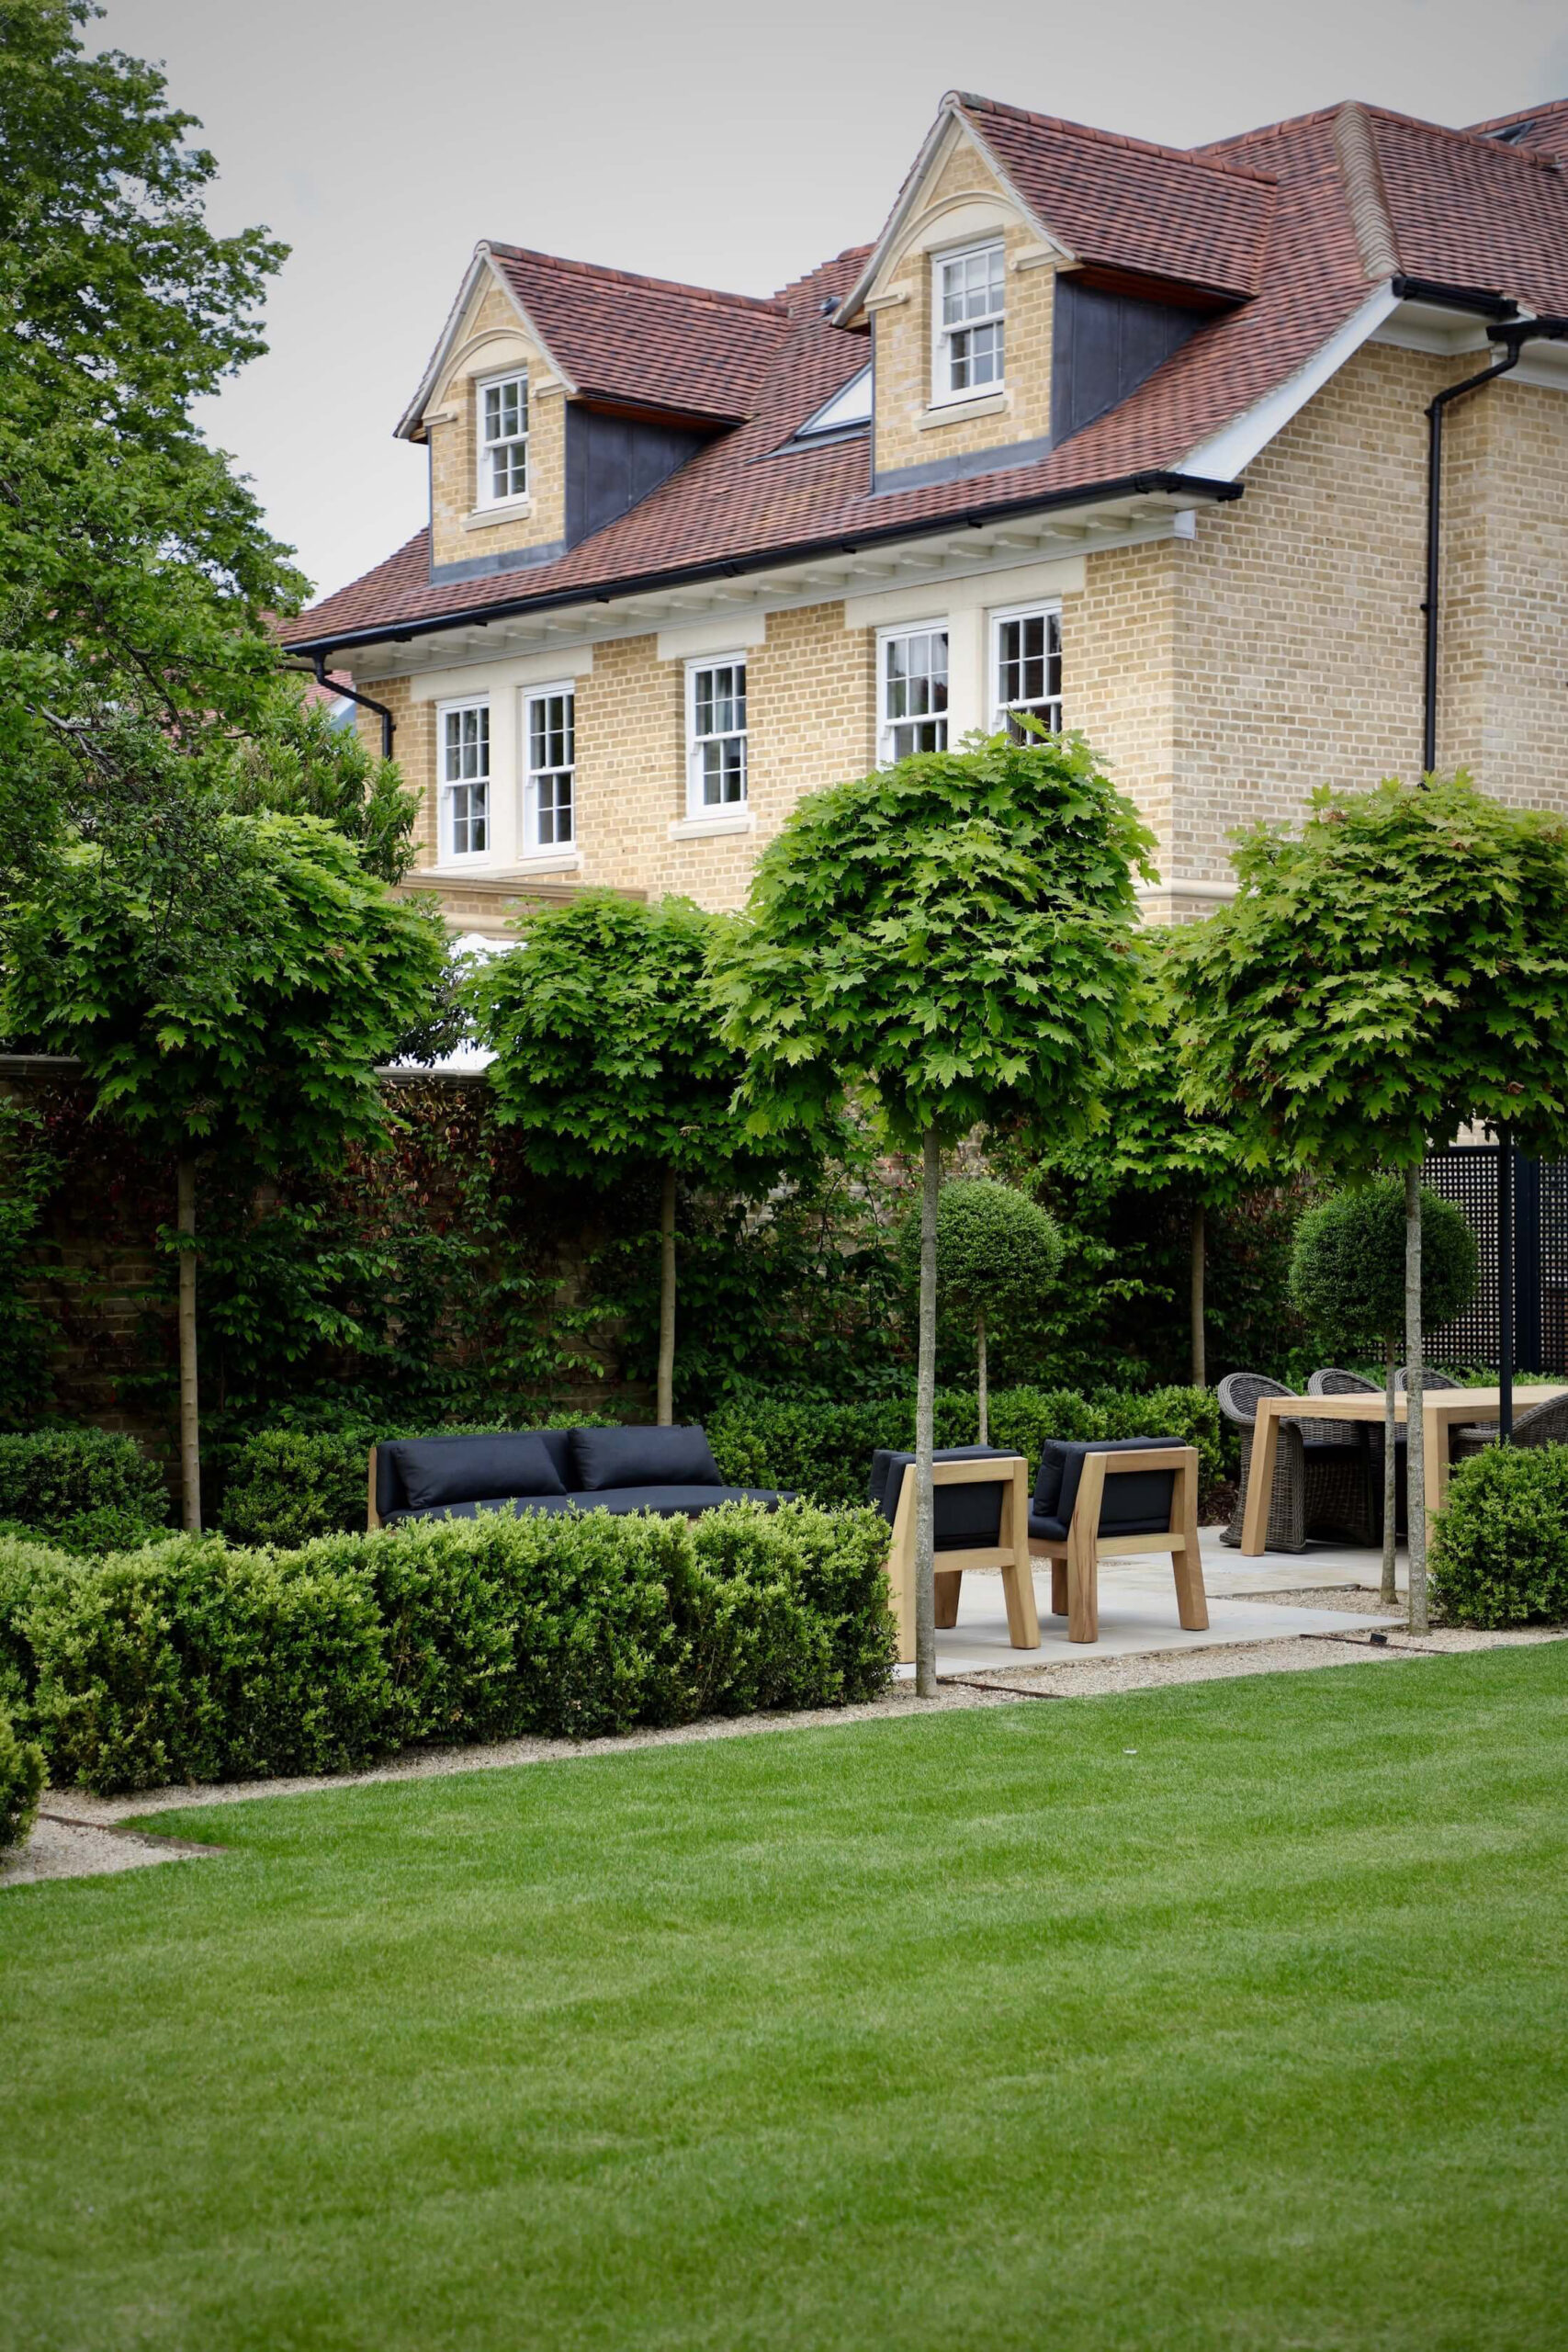 townhouse garden in Oxford with mop head trees and garden furniture